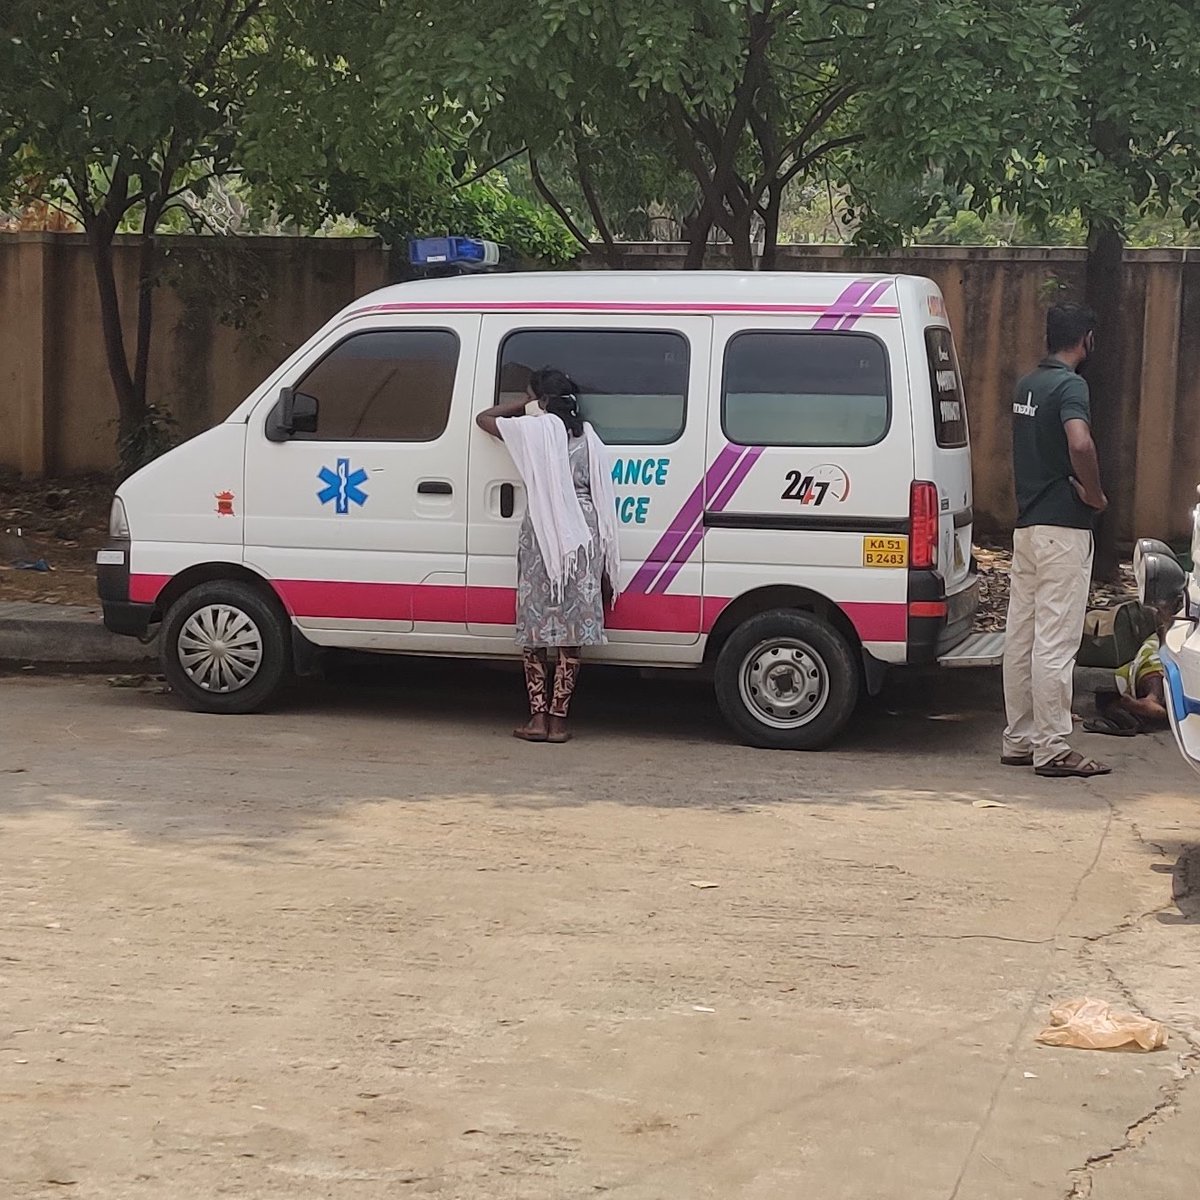 Despite a relative’s relentless attempts, 24-year-old Sunitha refused to move away from the ambulance, where she has been for more than an hour looking at her mother Valliyamma’s body. She had to wait for more than six hours before her mother's body was cremated.